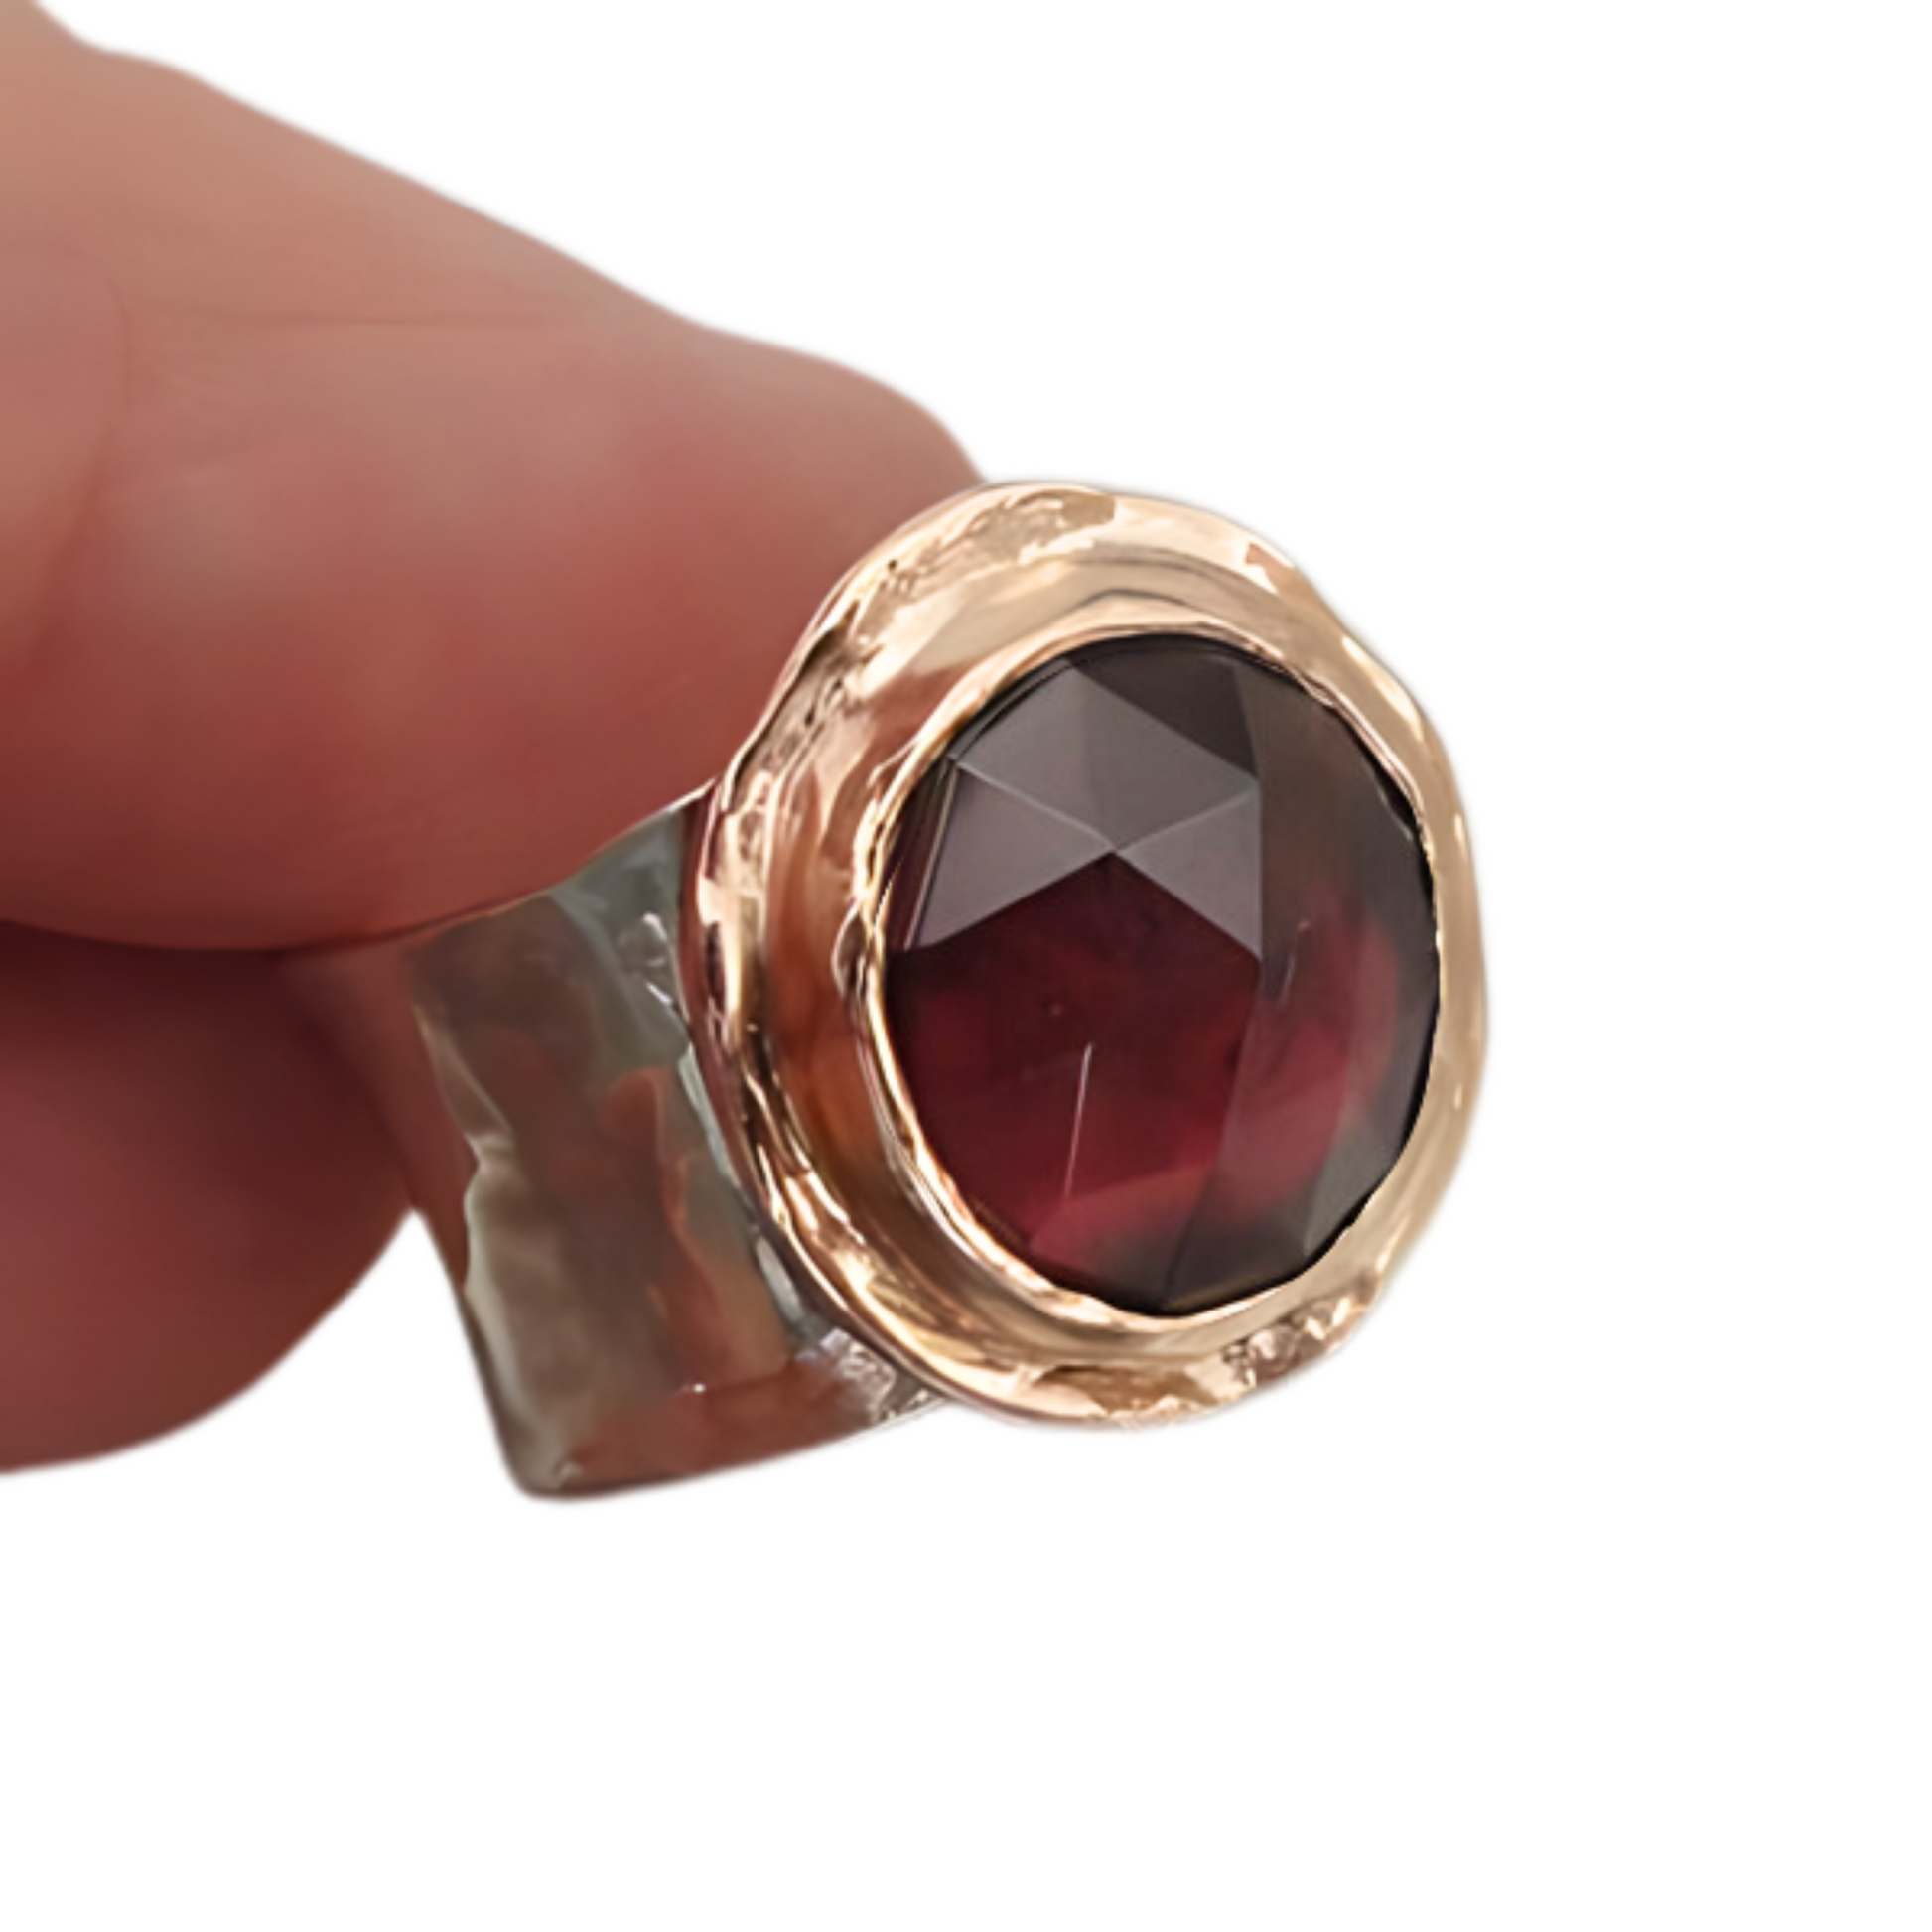 Sculptural sterling silver Ring with Natural Garnet gemstones, decorated with 9K Red Gold<br>Wide Ring, silver &amp; gold ring, statement ring.